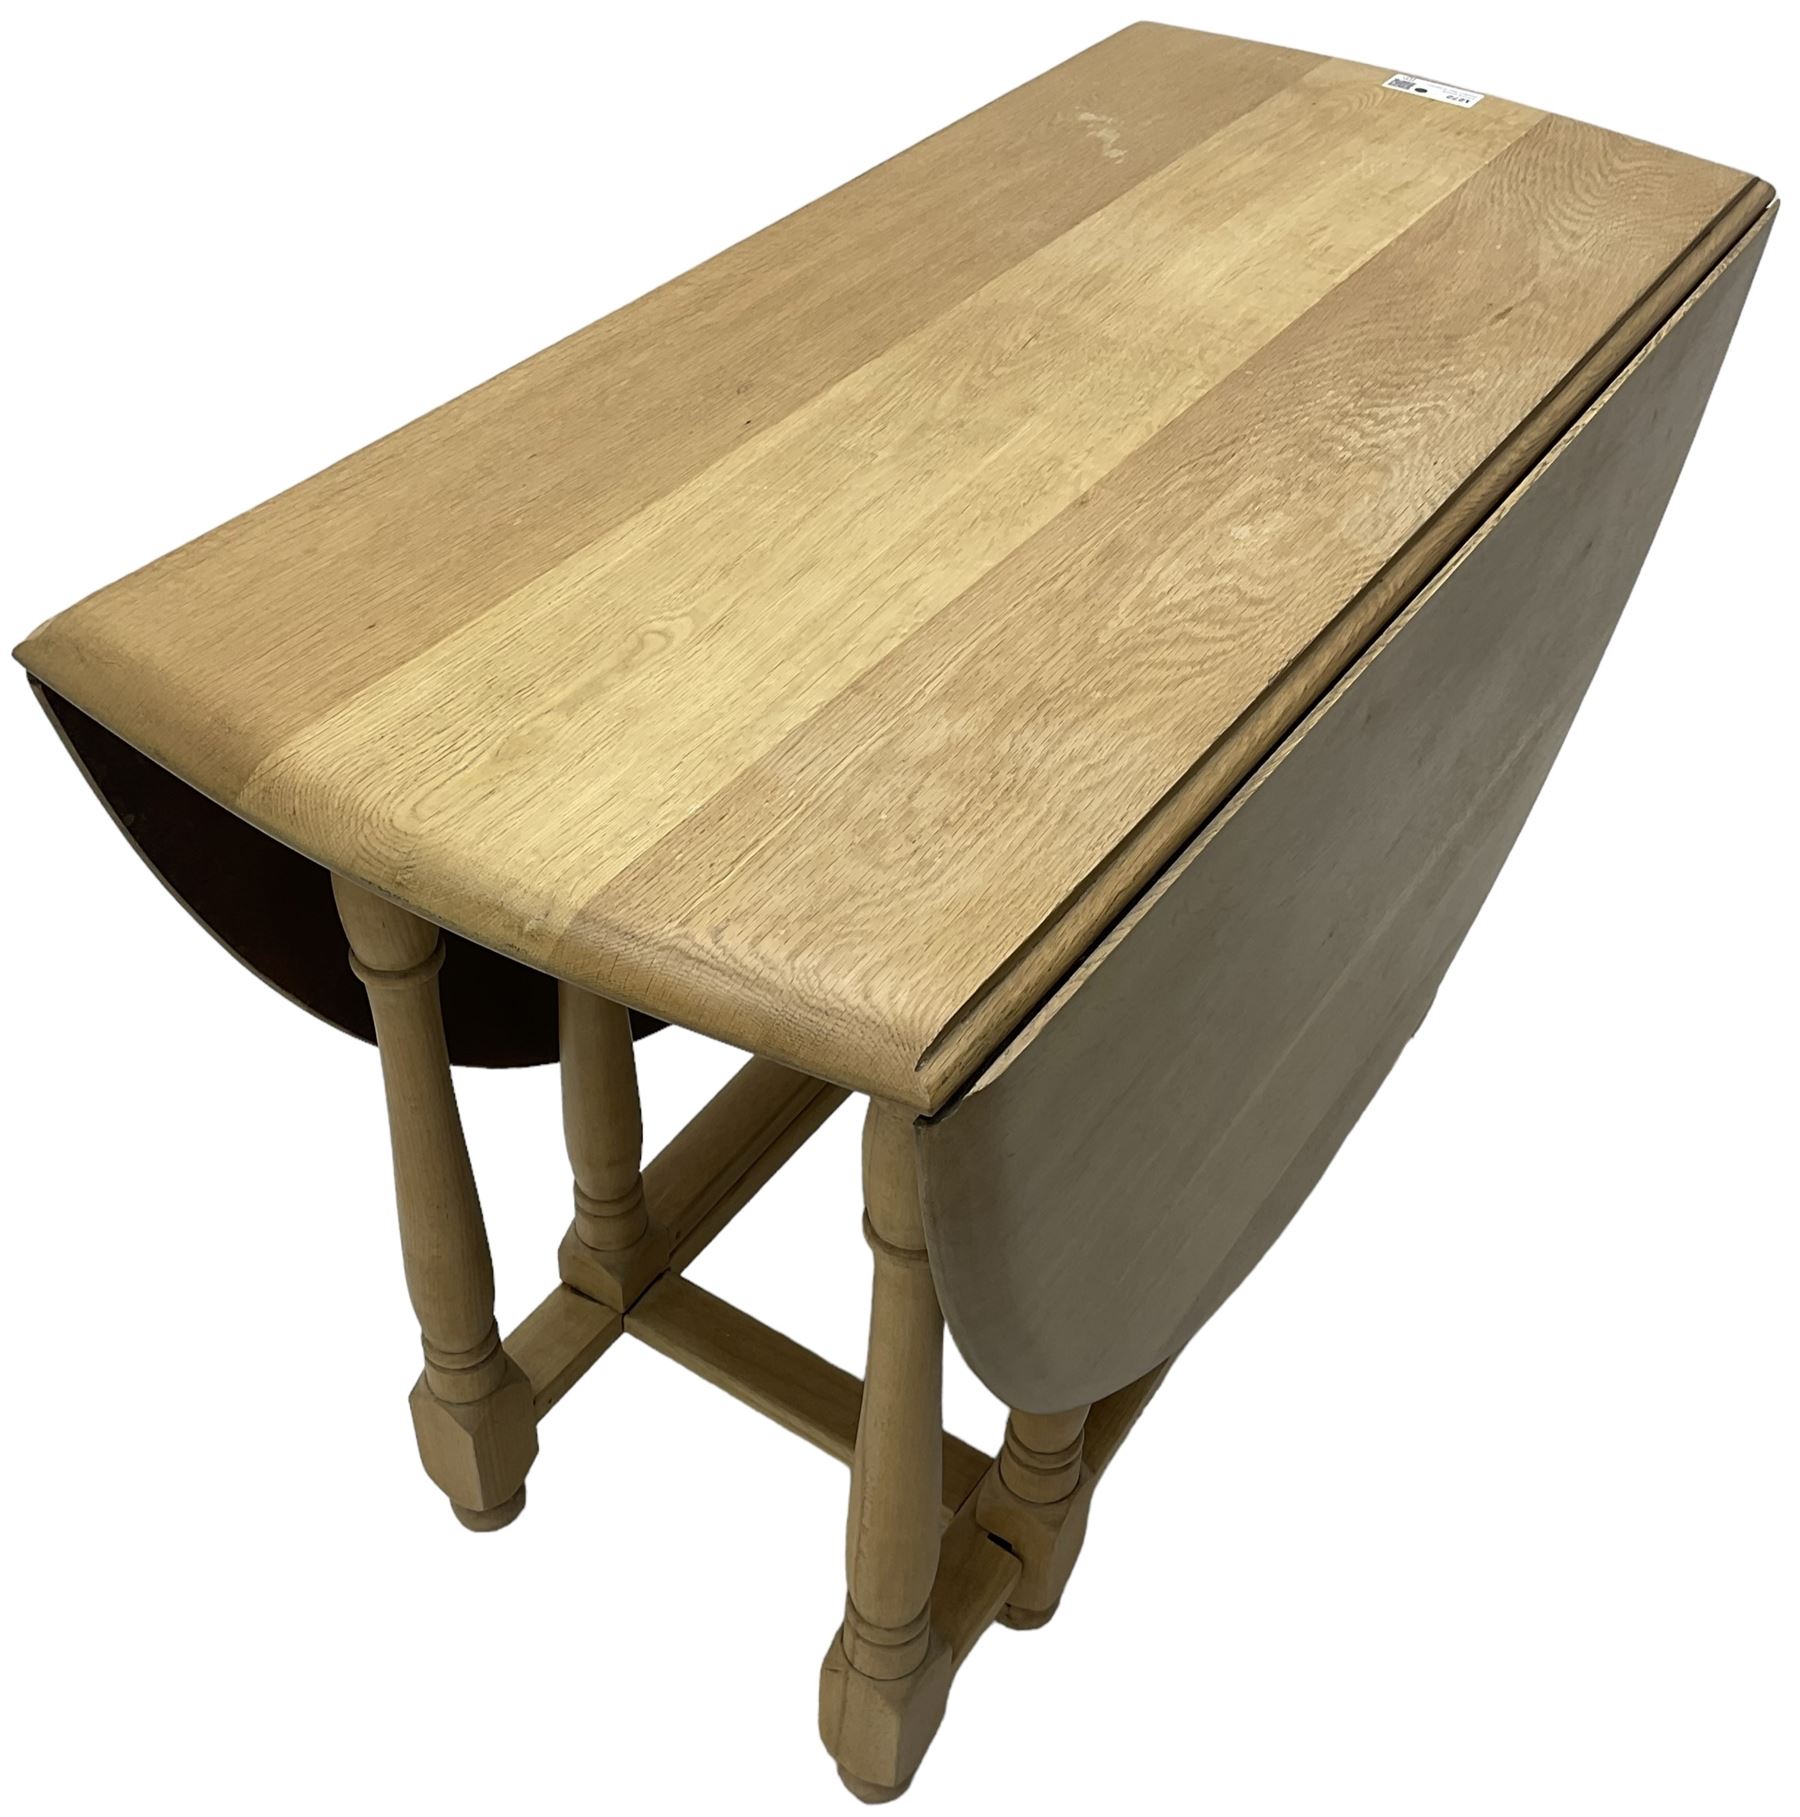 Contemporary oak and beech dining table - Image 4 of 6